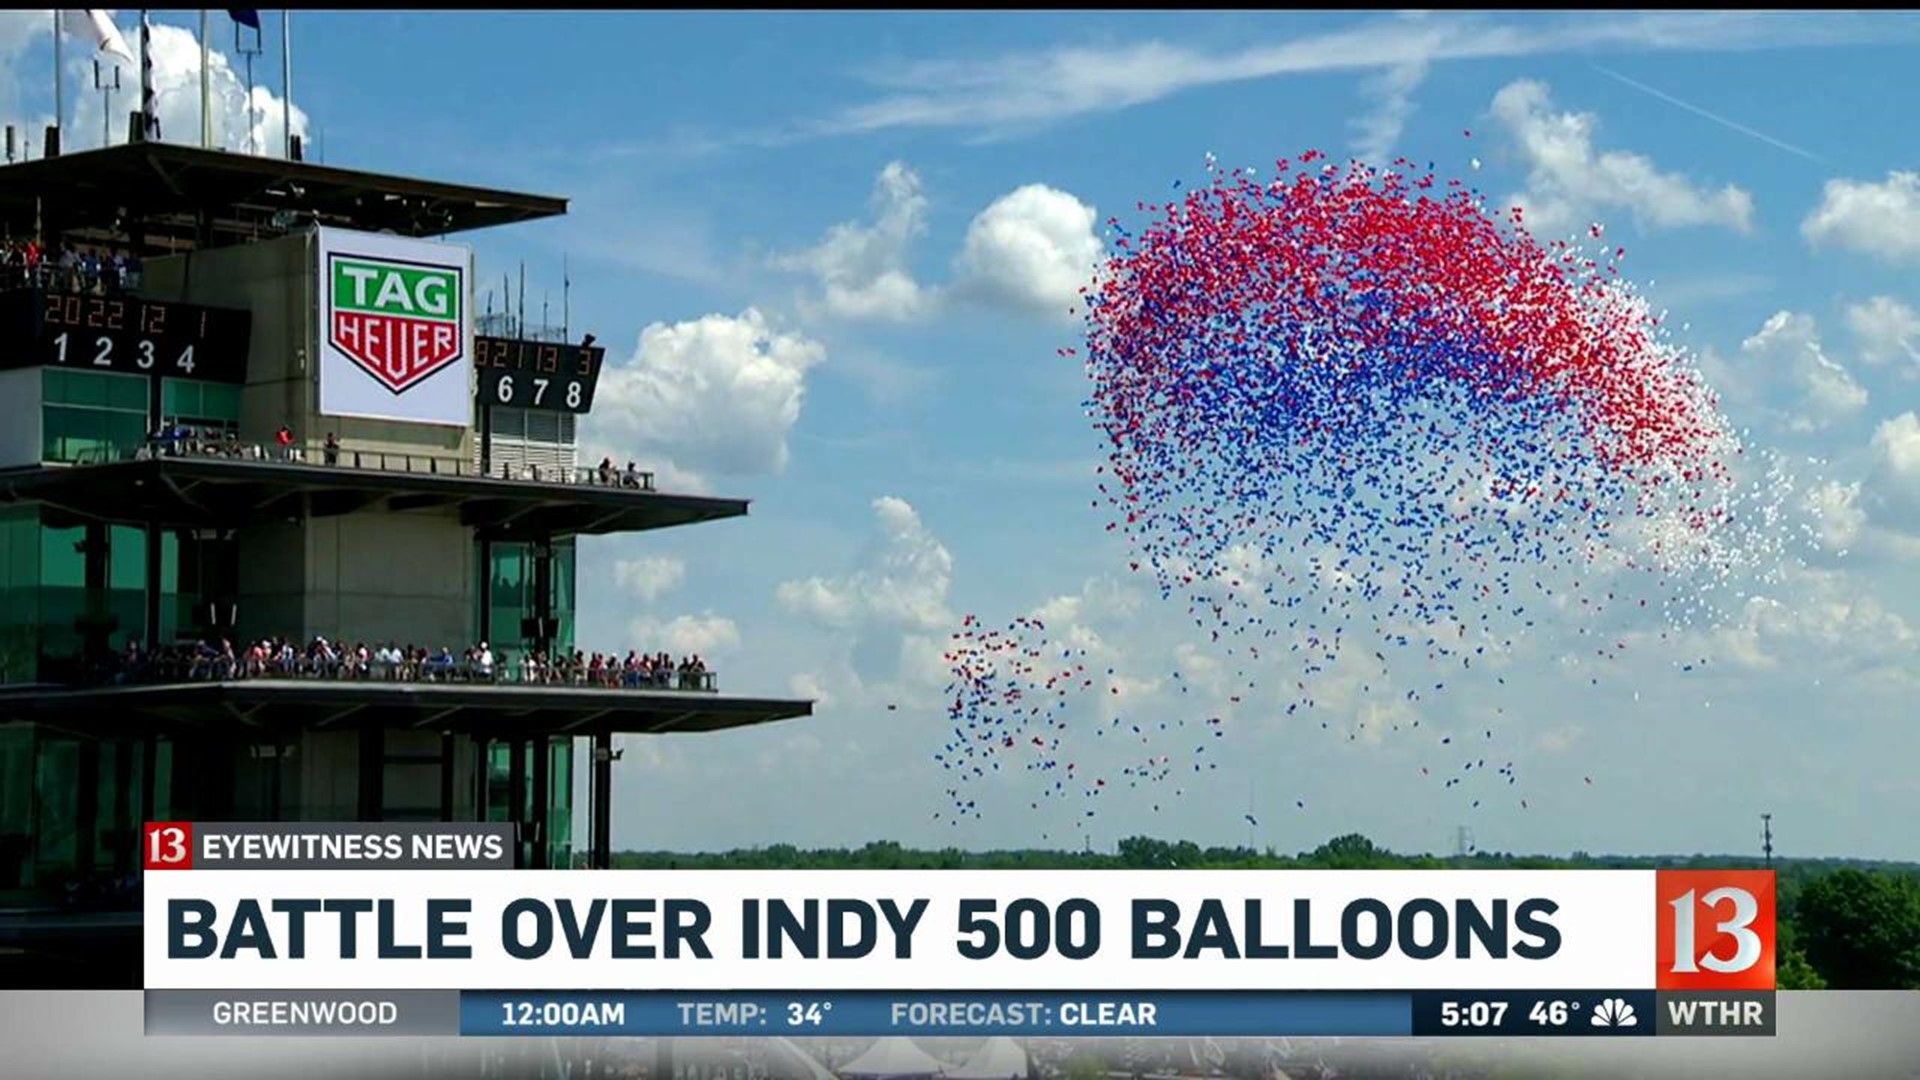 Battle over Indy 500 balloons